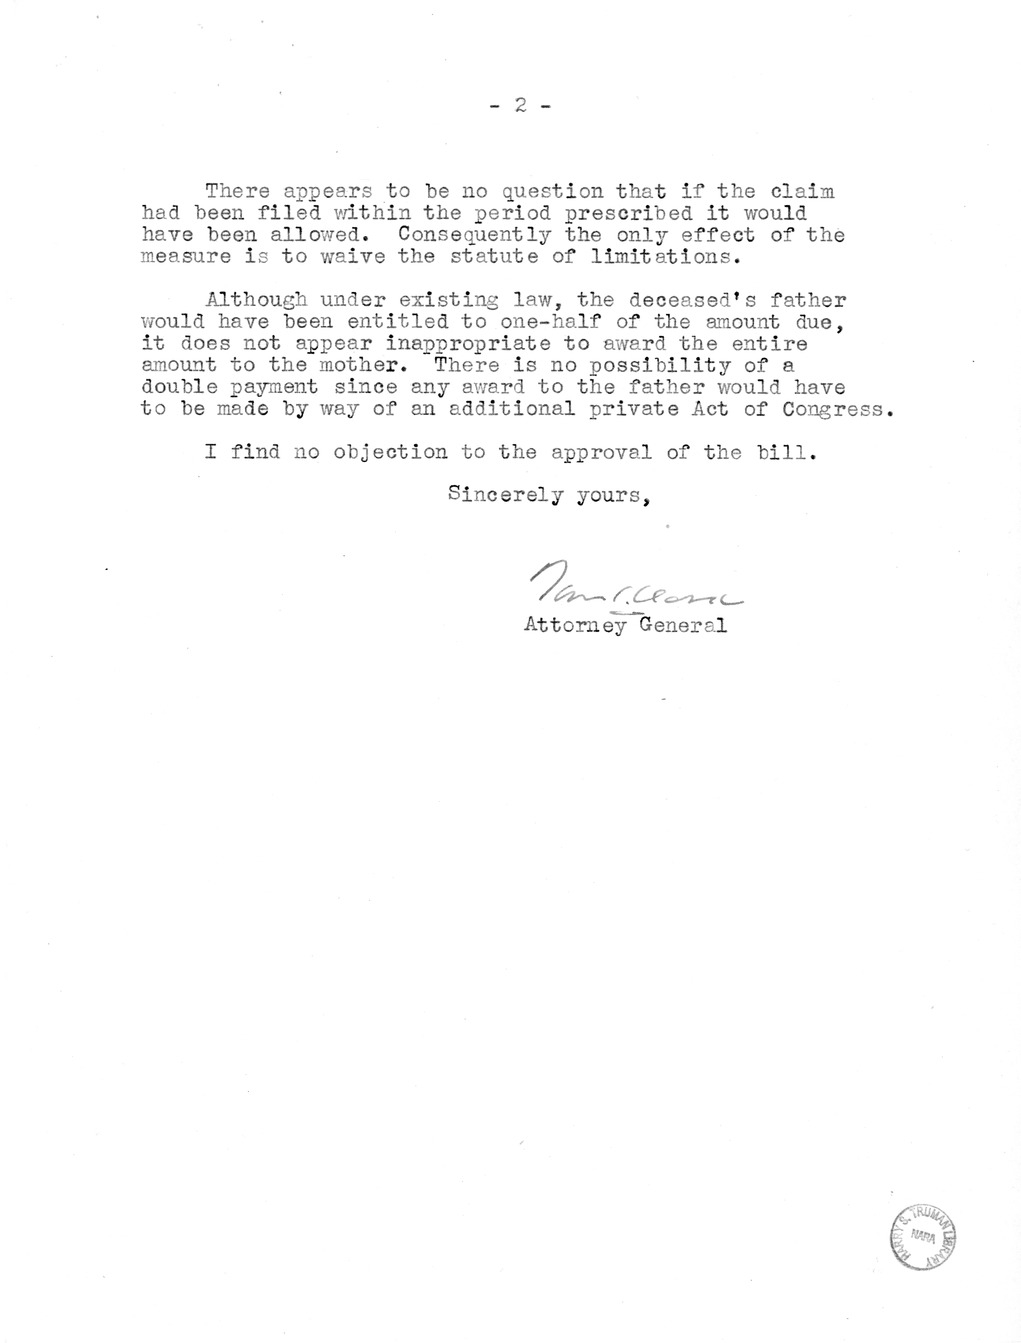 Memorandum from Harold D. Smith to M. C. Latta, H.R. 1956, For the Relief of Annie M. Lannon, with Attachments